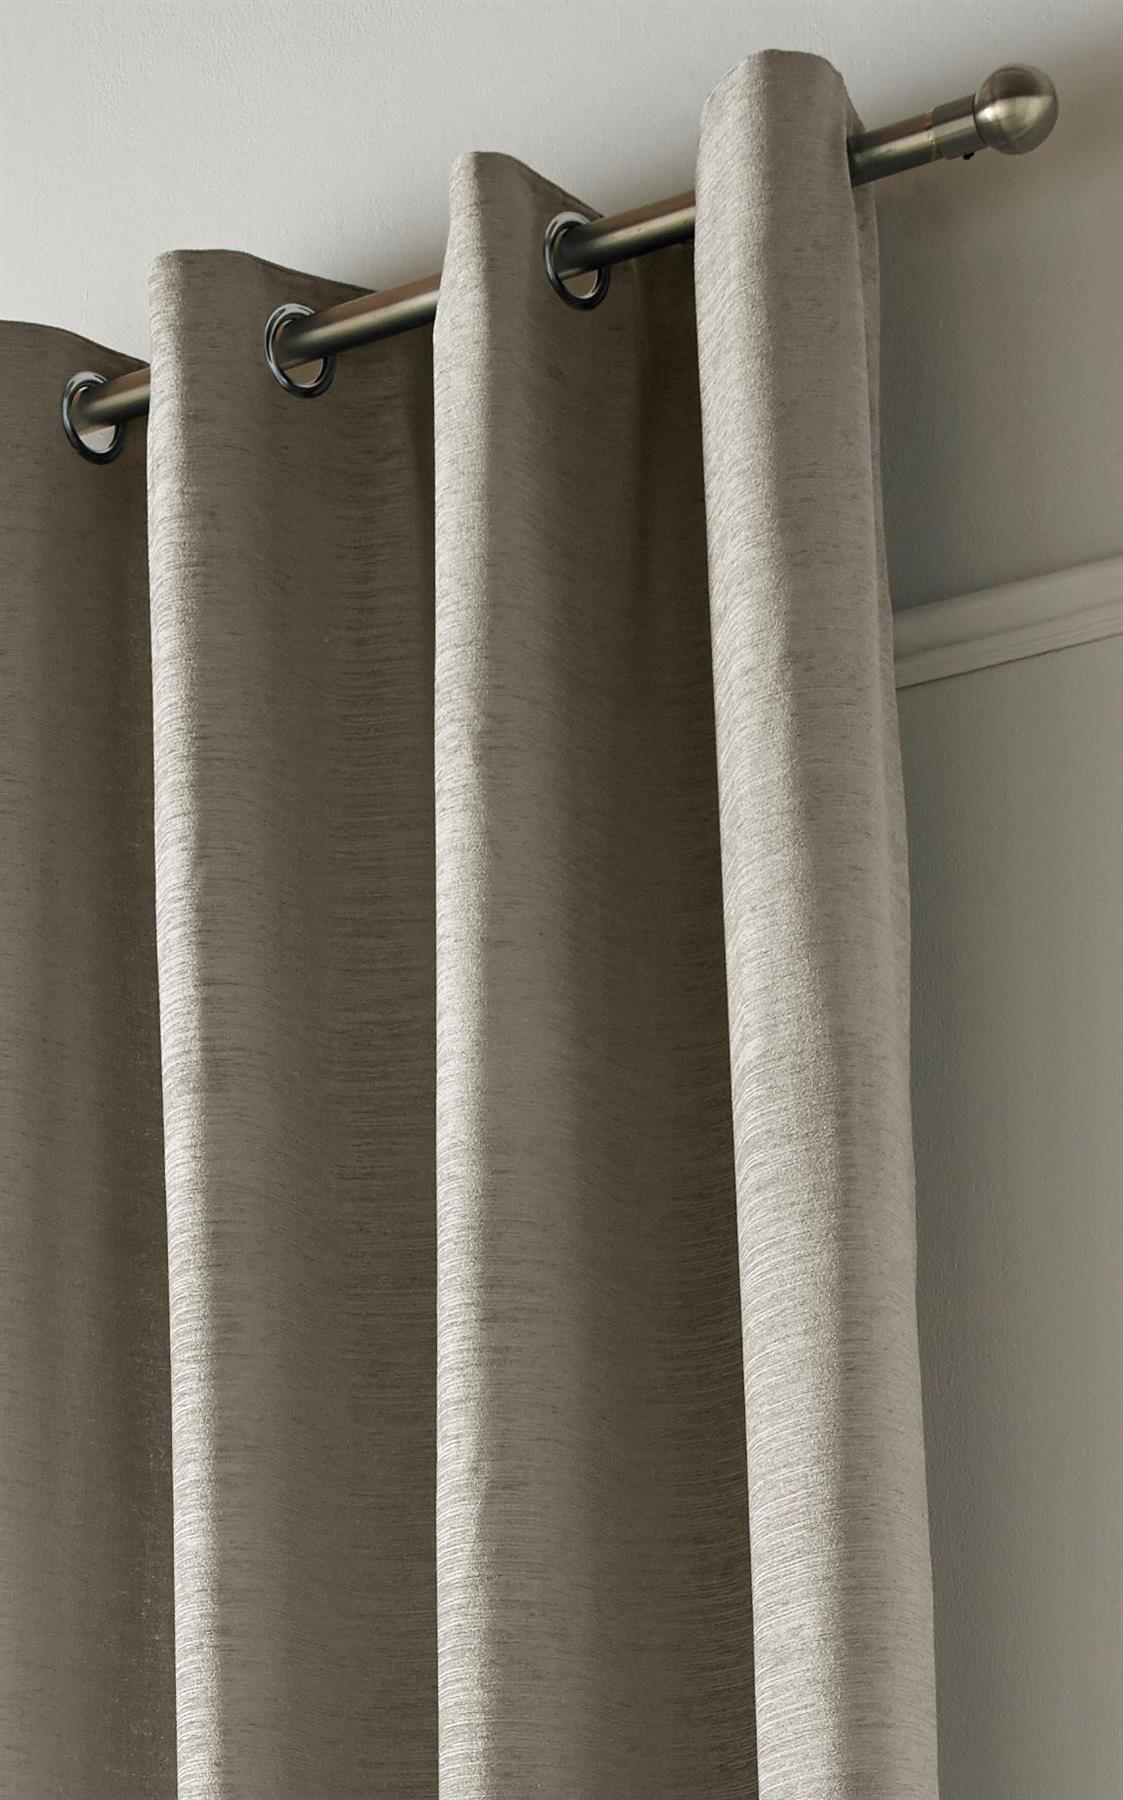 Cream Plain Chenille Fully Lined Eyelet Curtains Pair